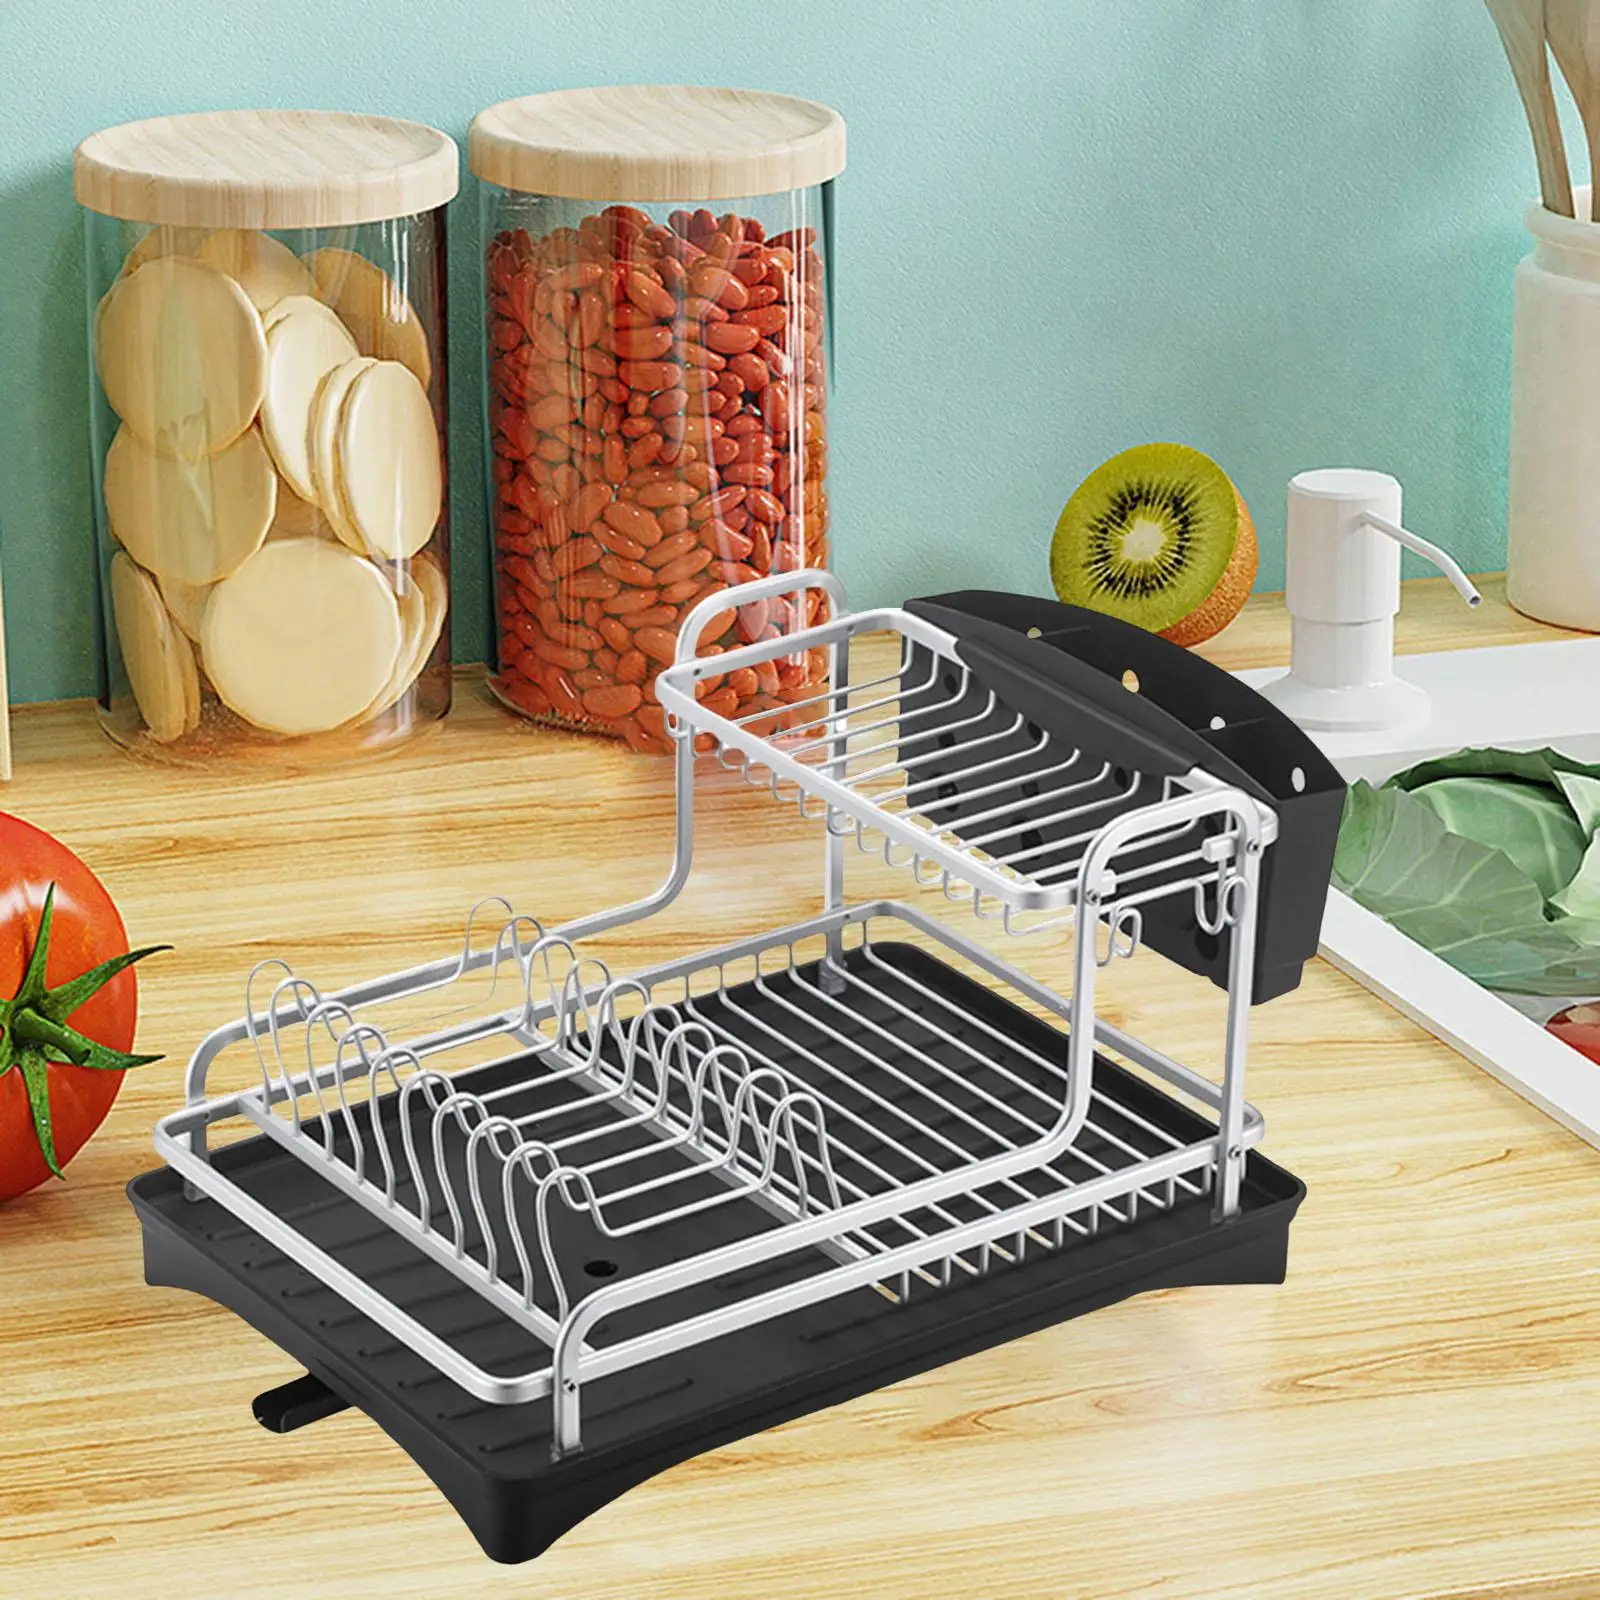 Dish Drying Rack Cleaning Brush Holder Kitchen Organizer for Countertop